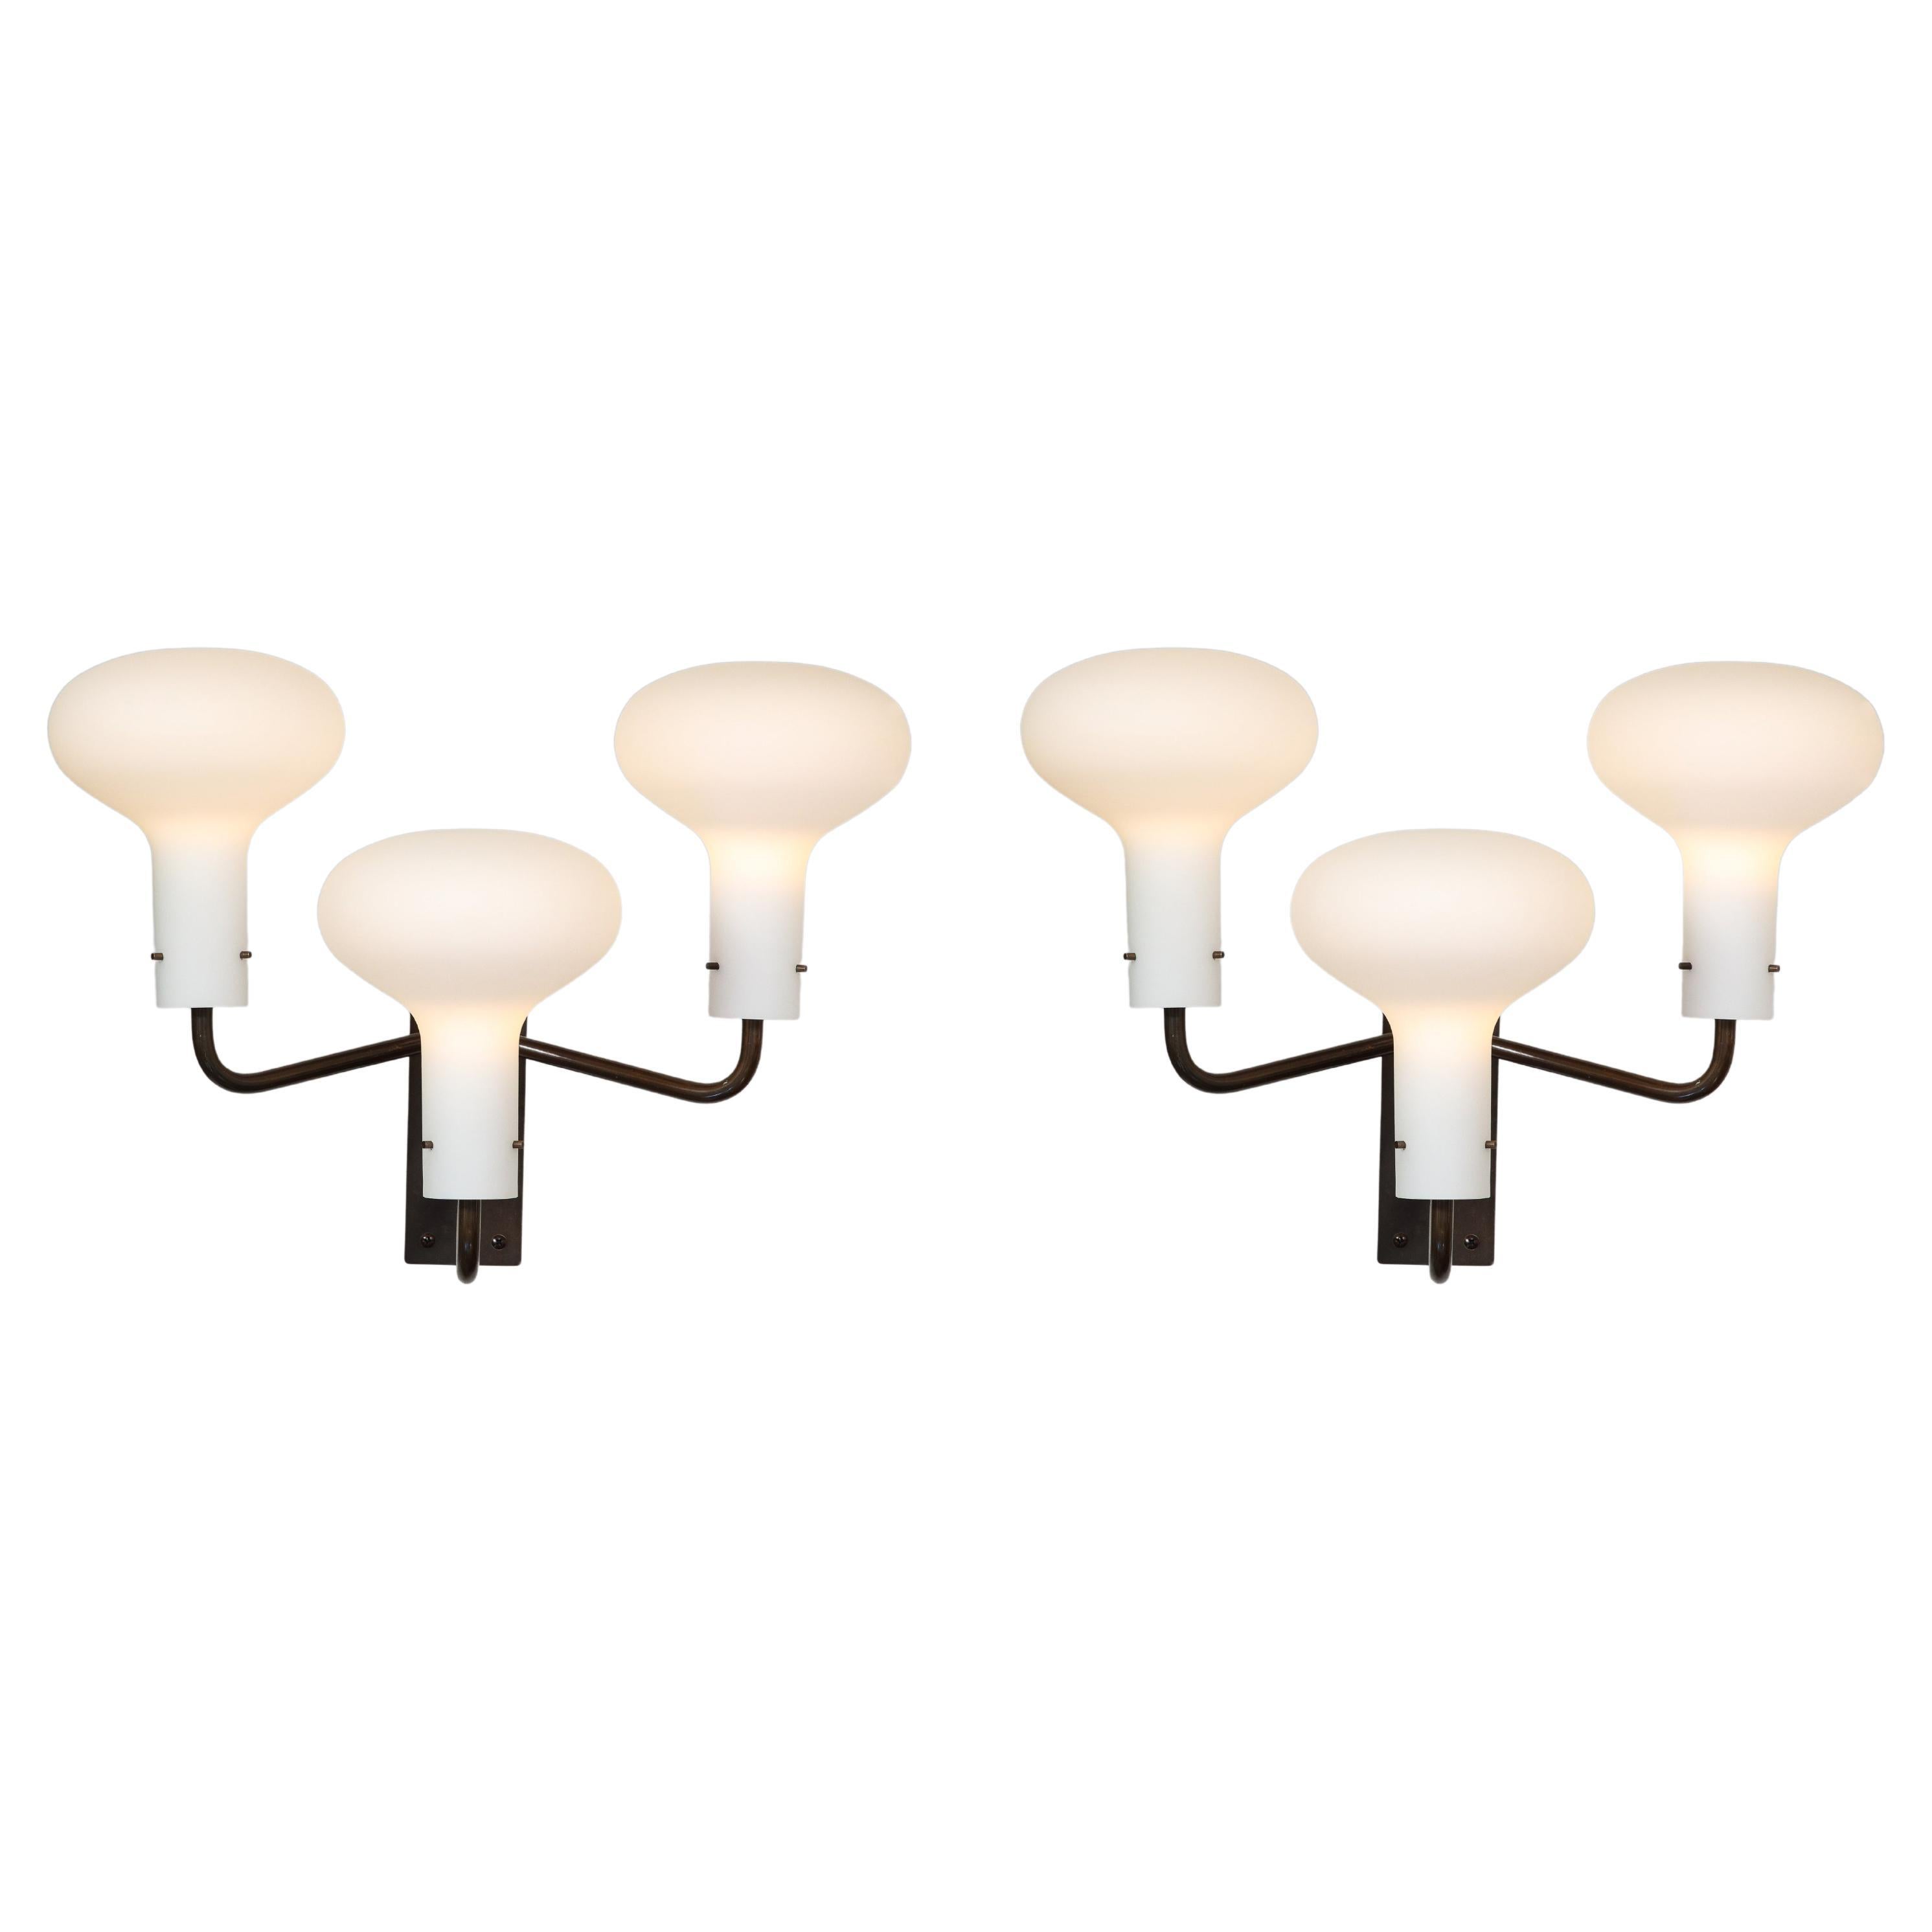 Ignazio Gardella for Azucena Pair of Three Arm Wall Lights Model LP12, 1950s For Sale